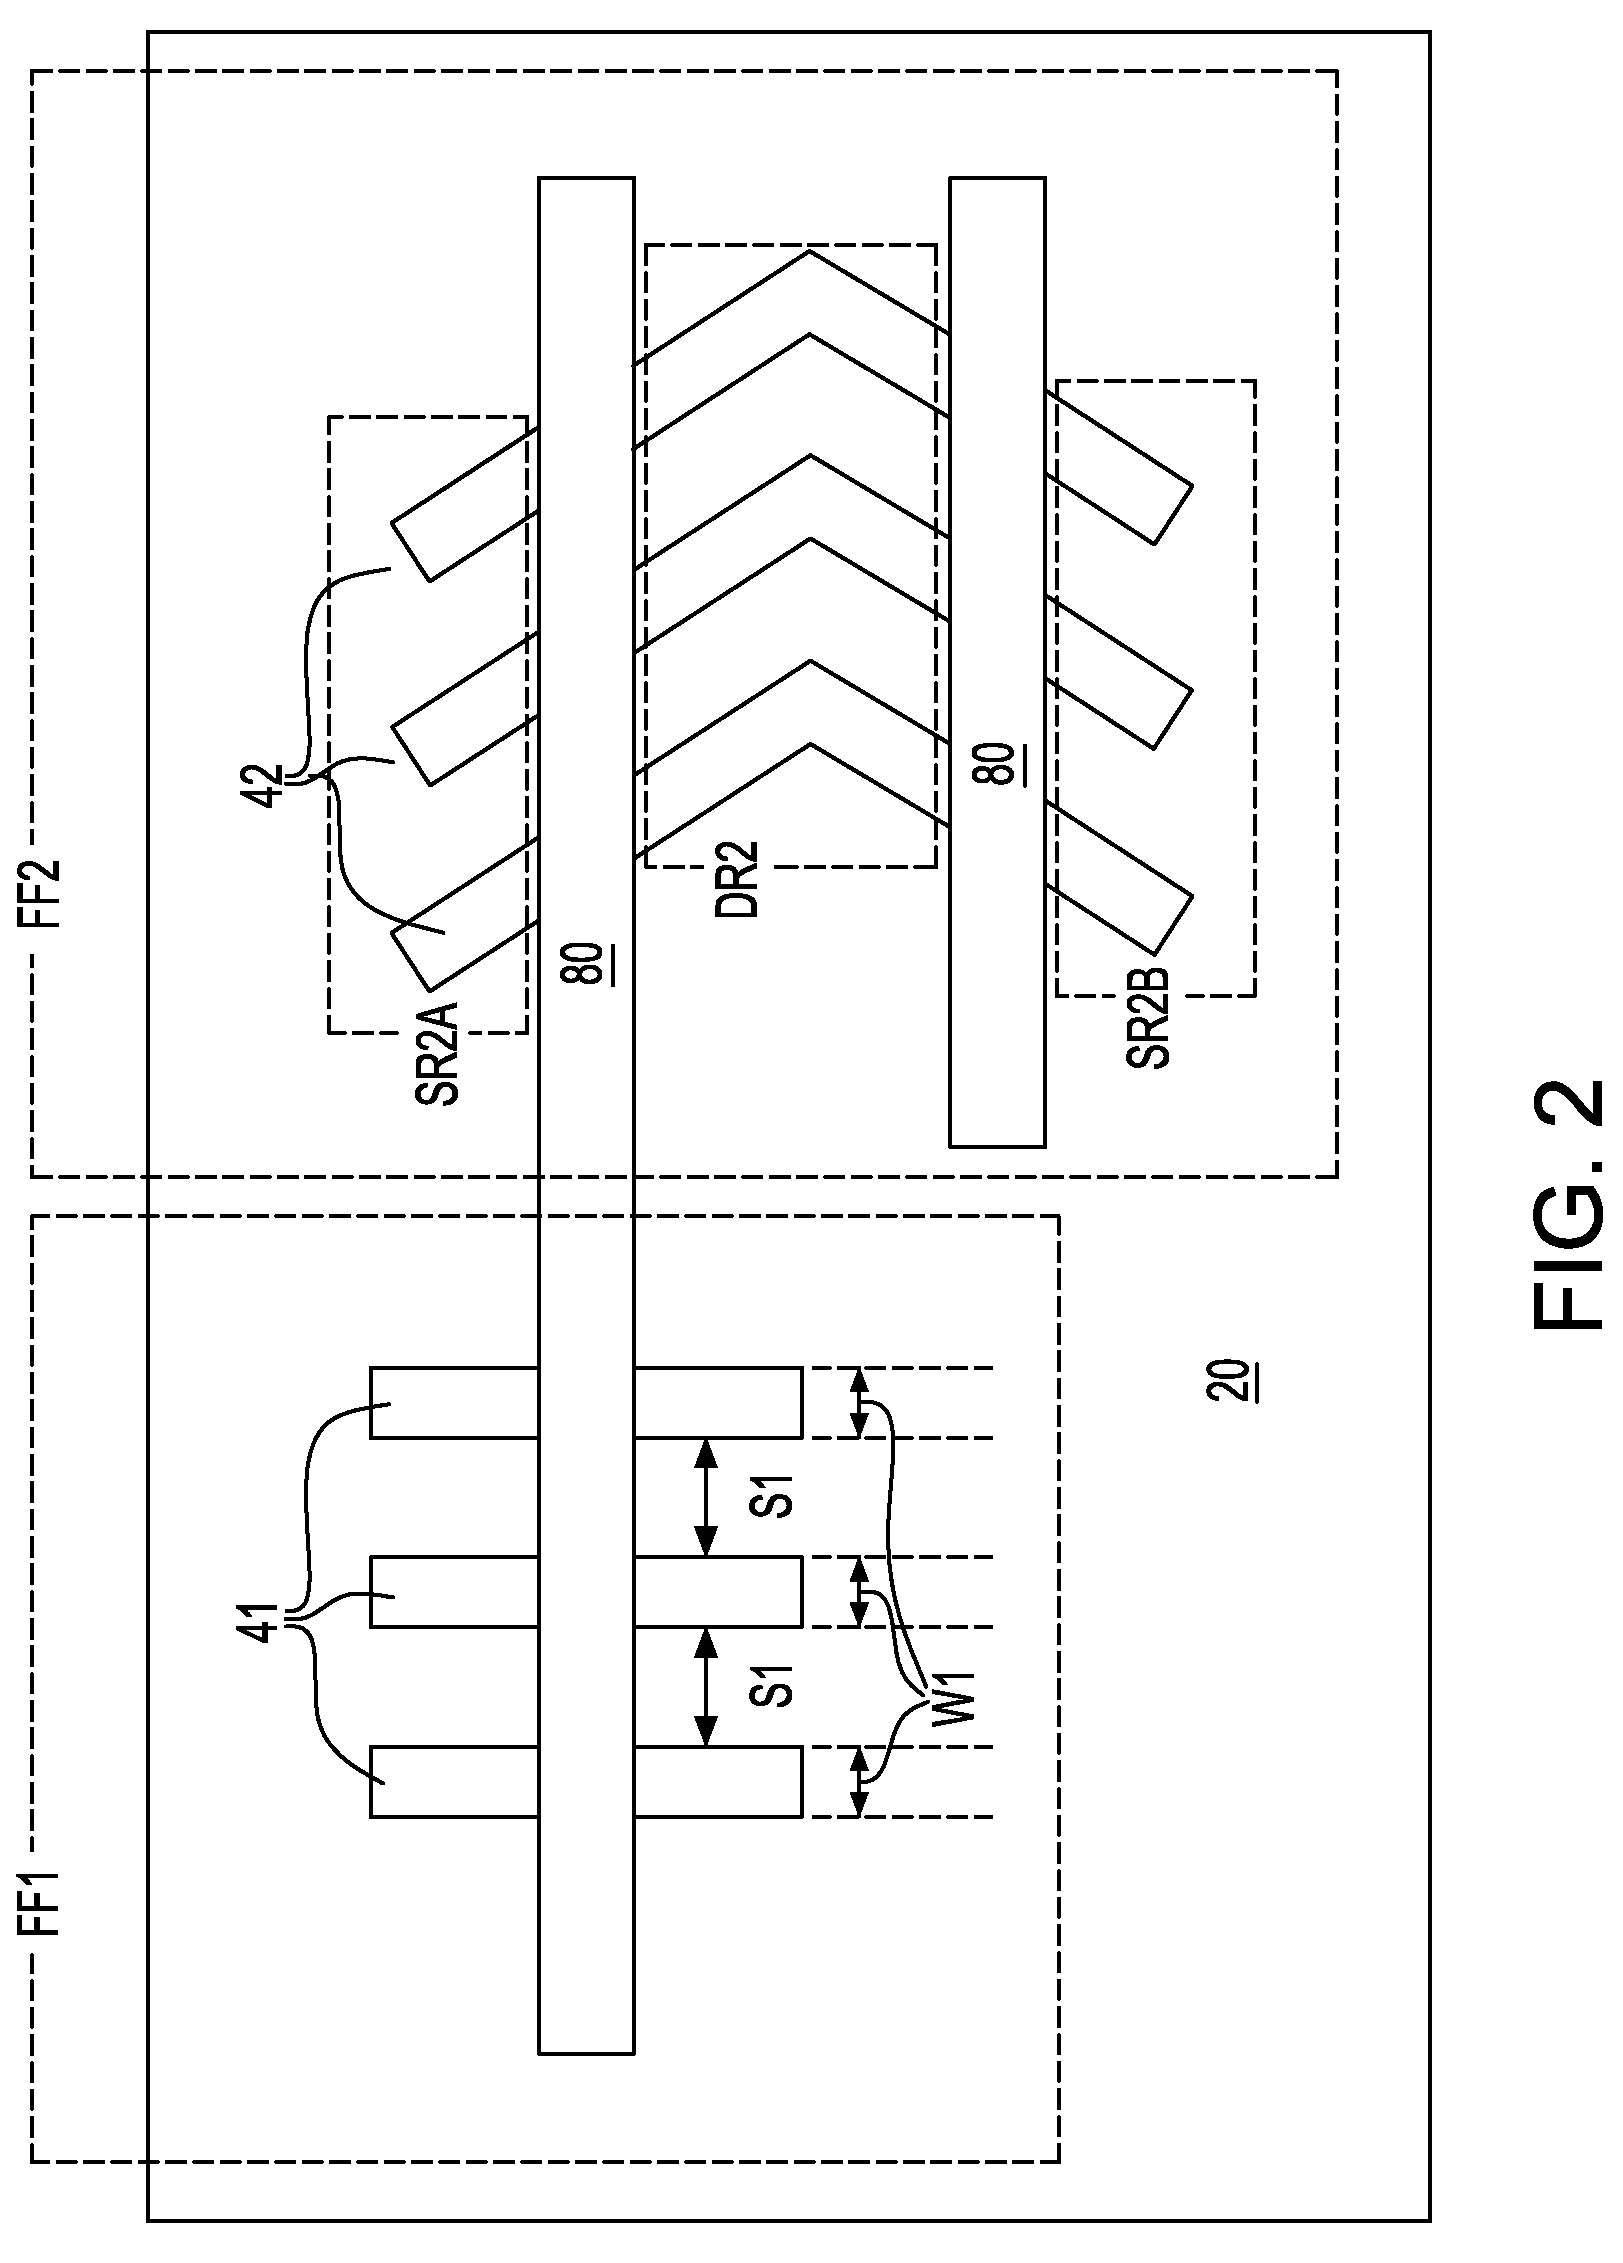 FinFET with sublithographic fin width